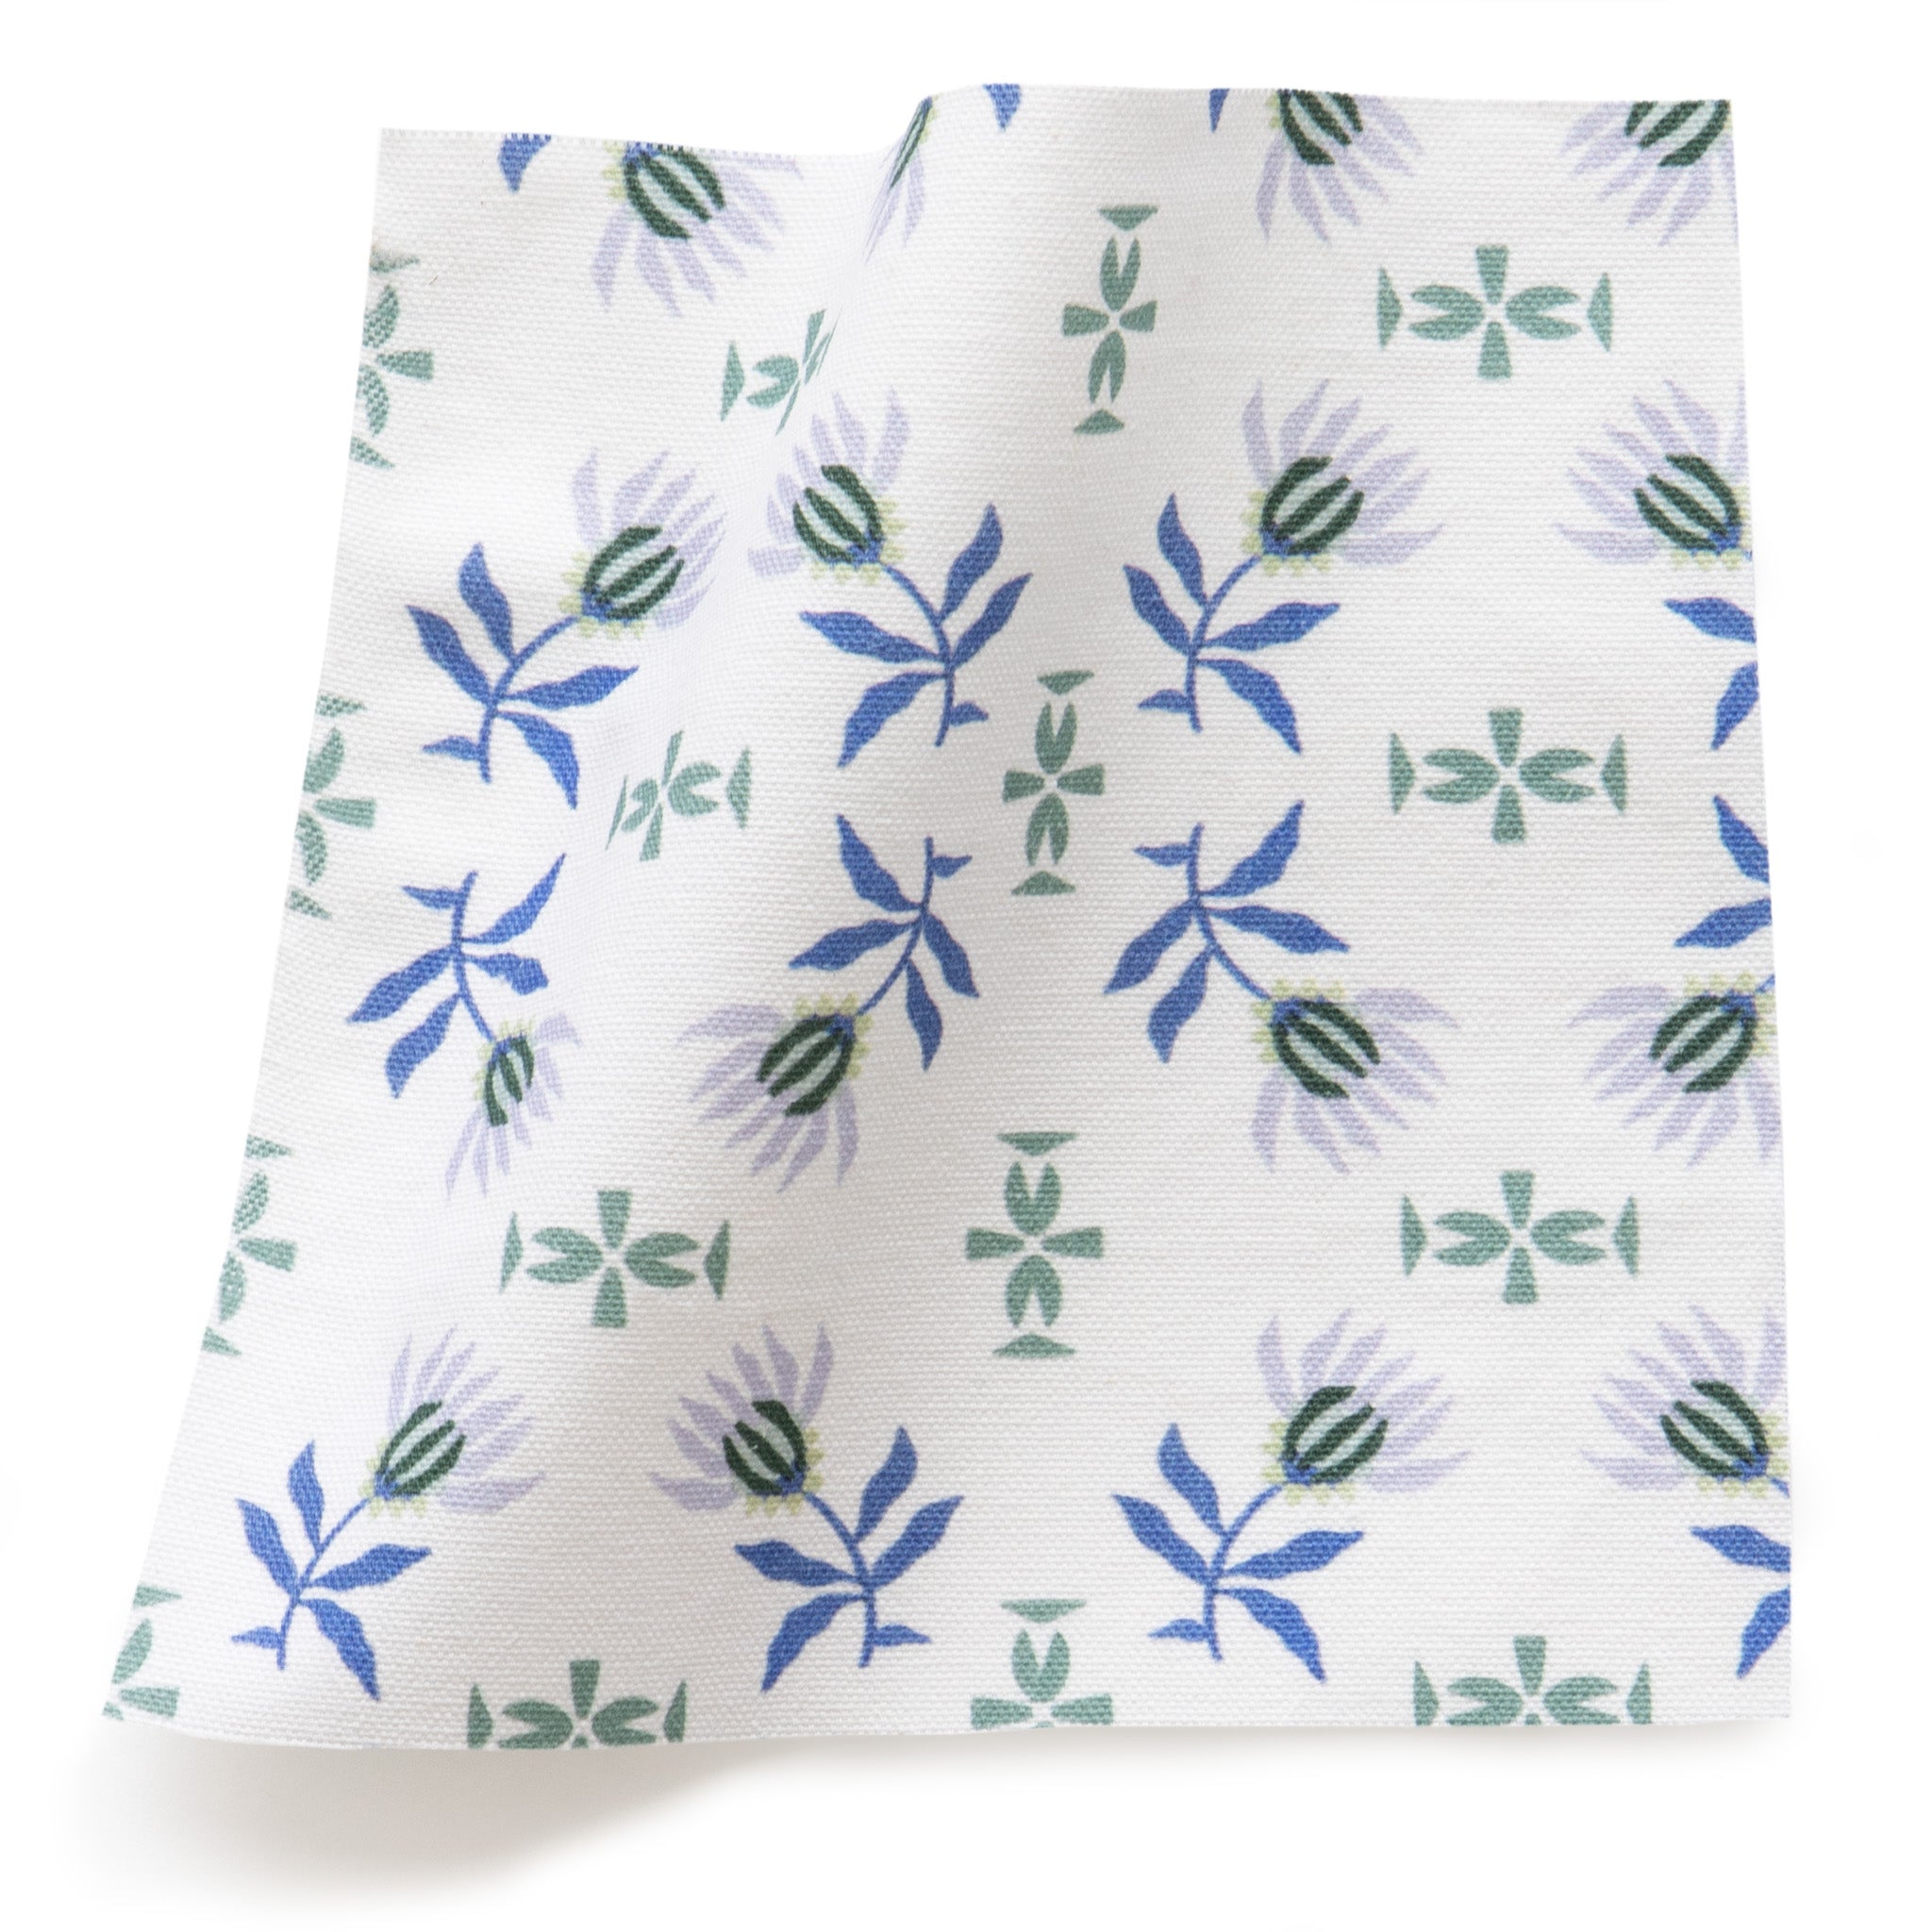 Blue & Green Floral Printed Cotton Swatch